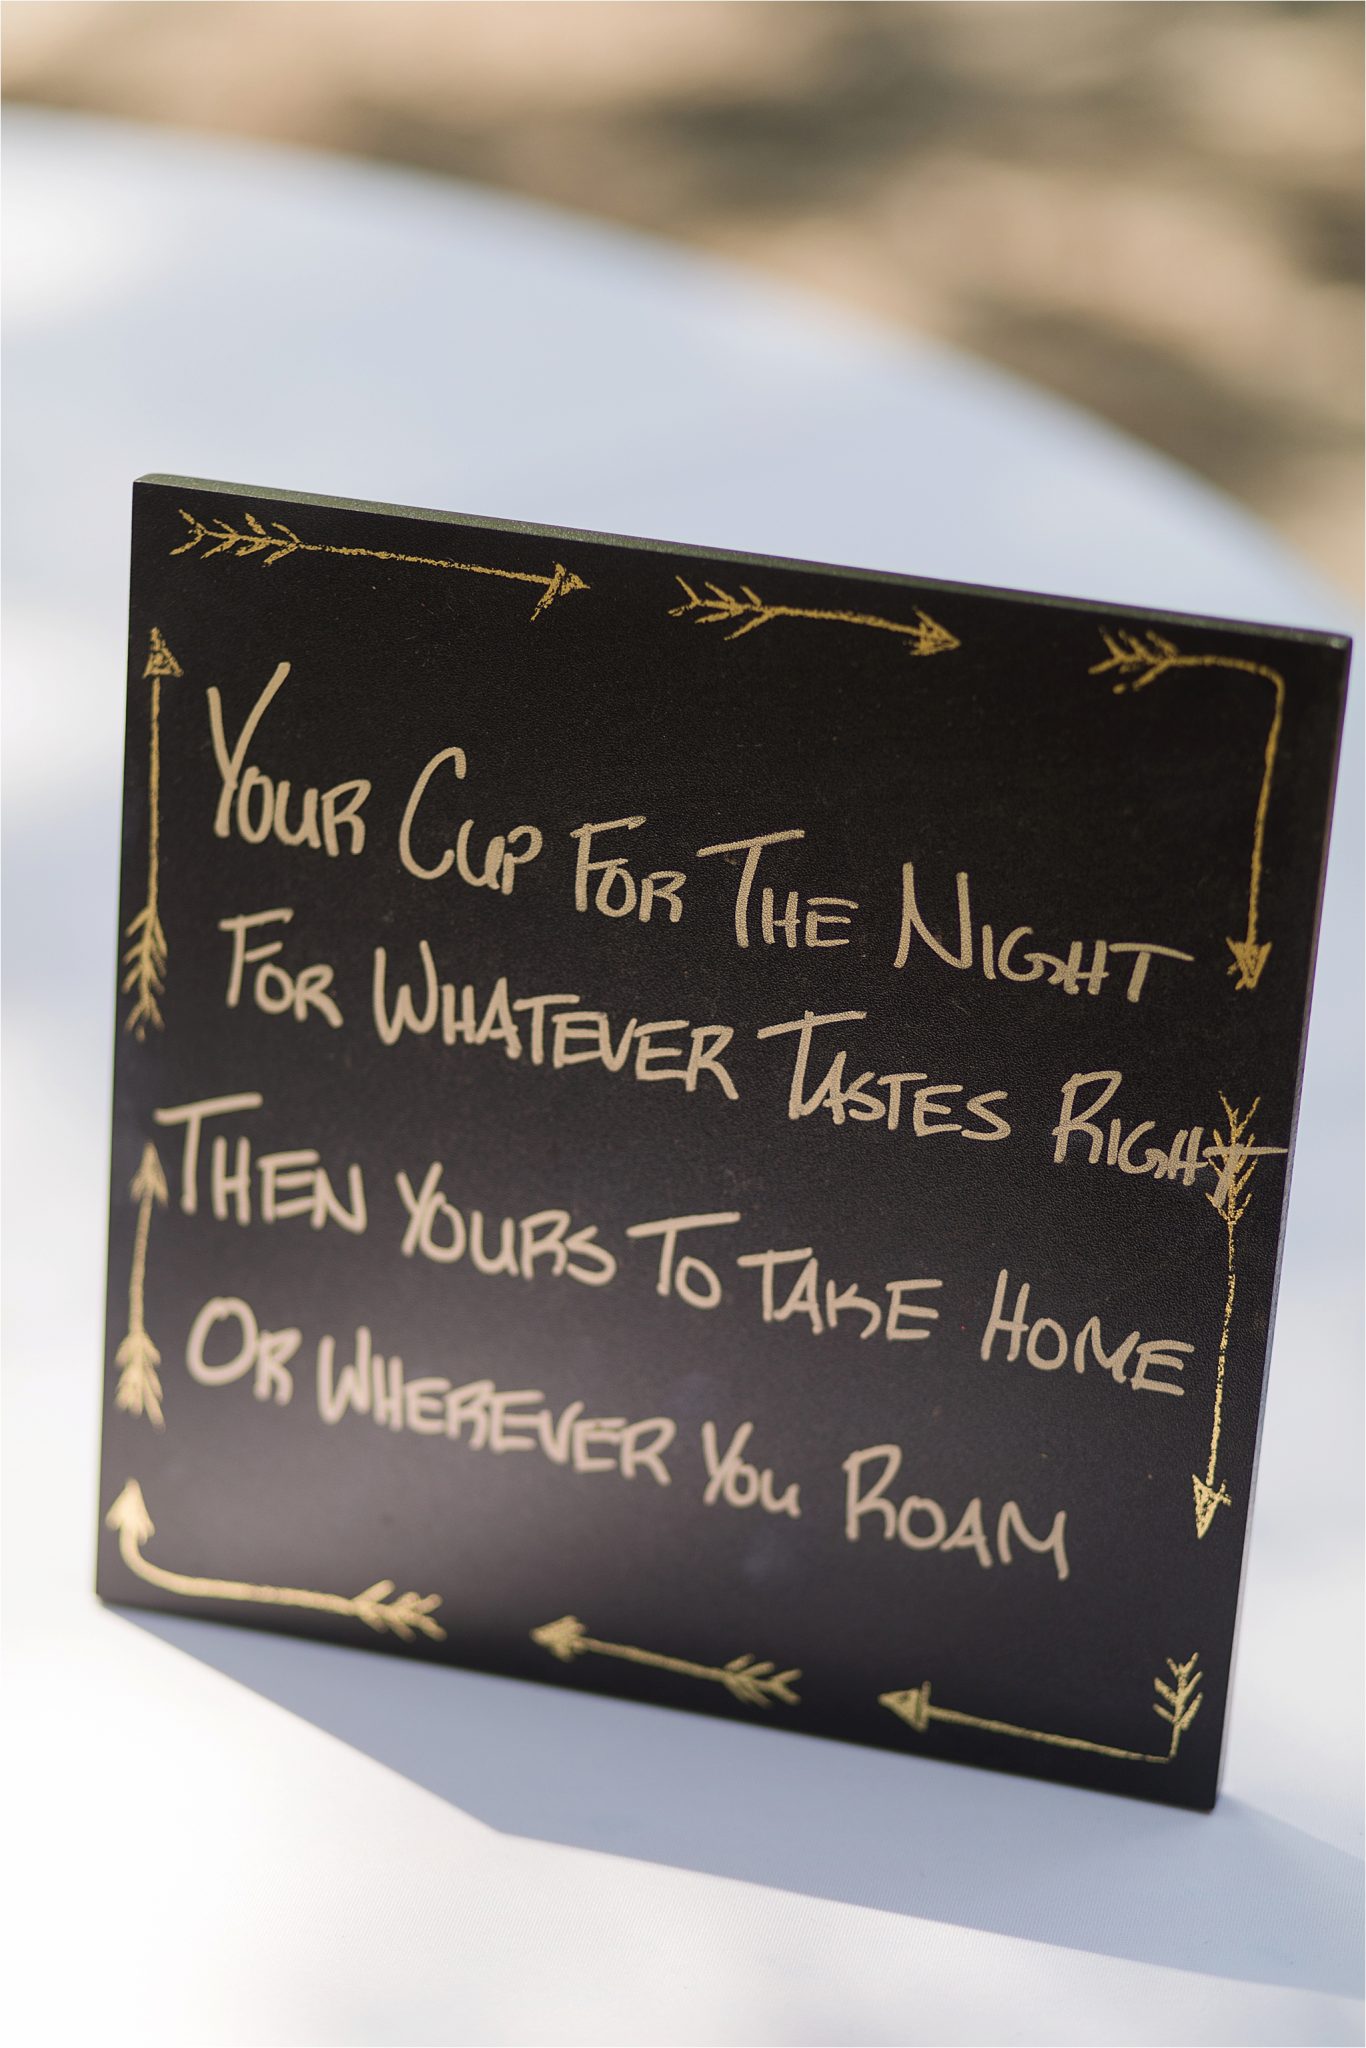 unique wedding favor ideas-wedding signs-cups as wedding favors-new guest gifts